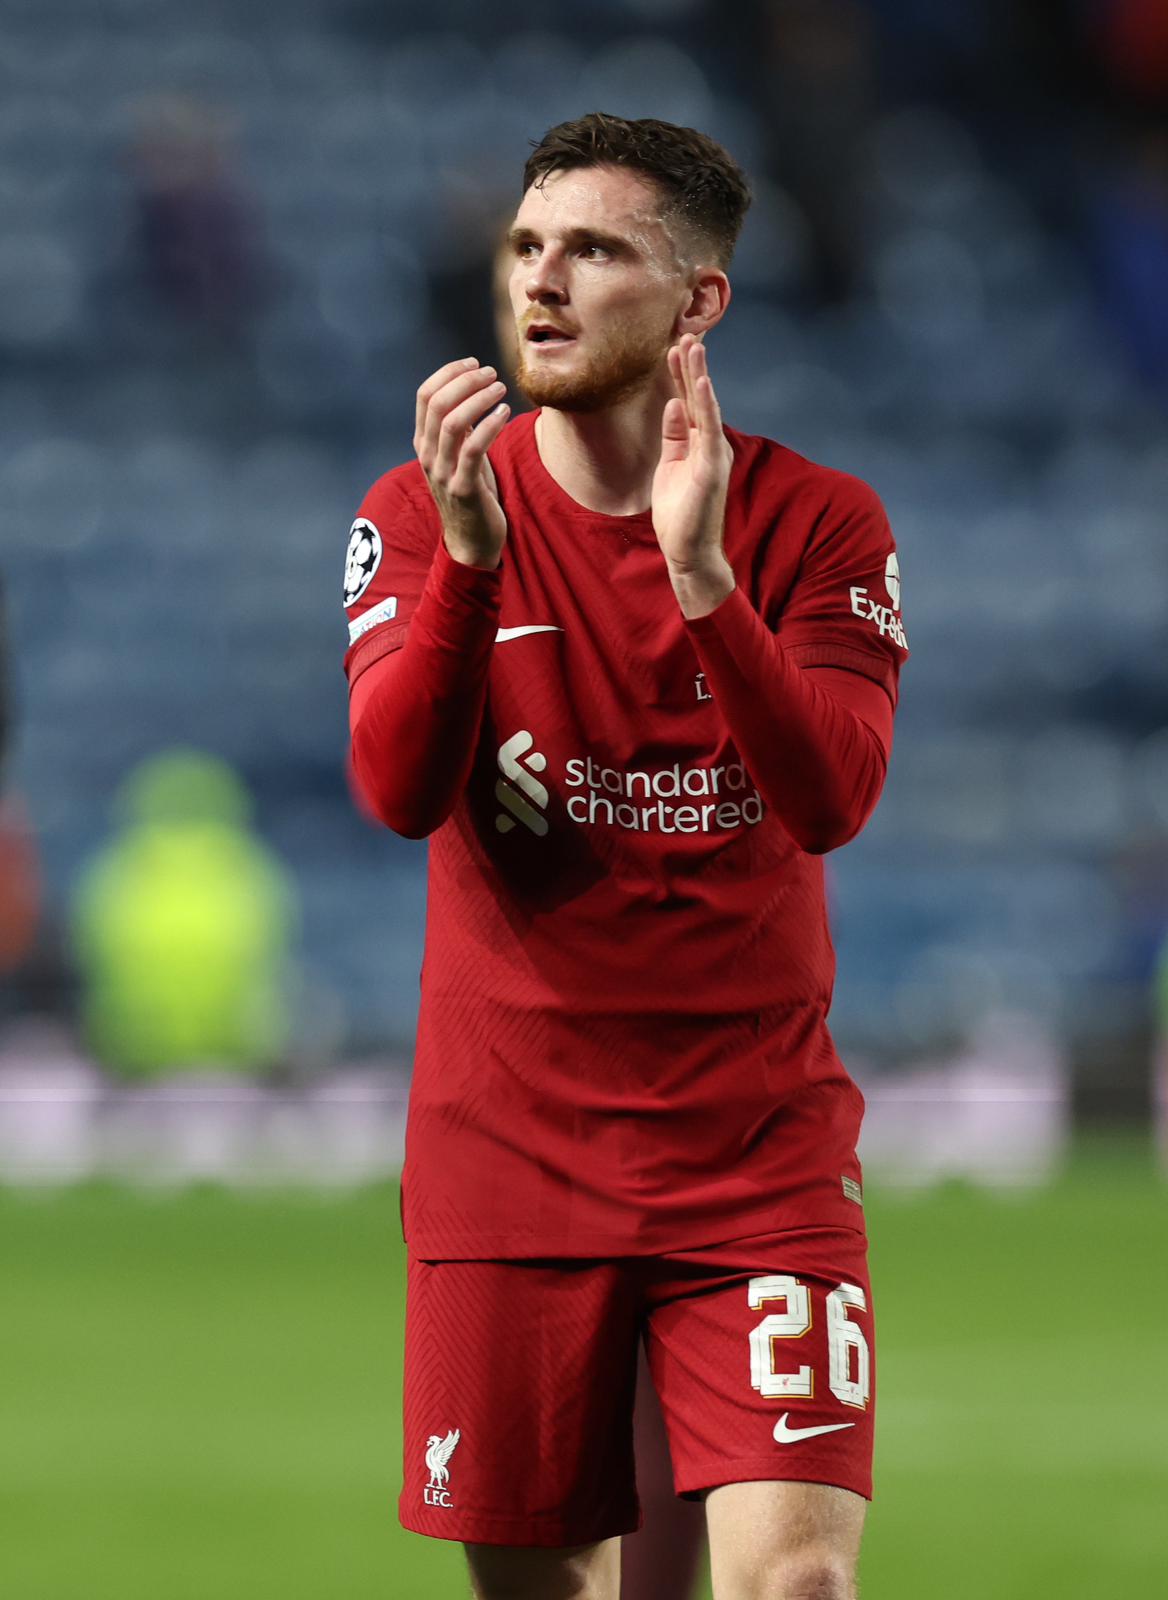  The Scottish captain Andrew Robertson babbles out Liverpool plans for their manager "Jurgen Klopp" send-off